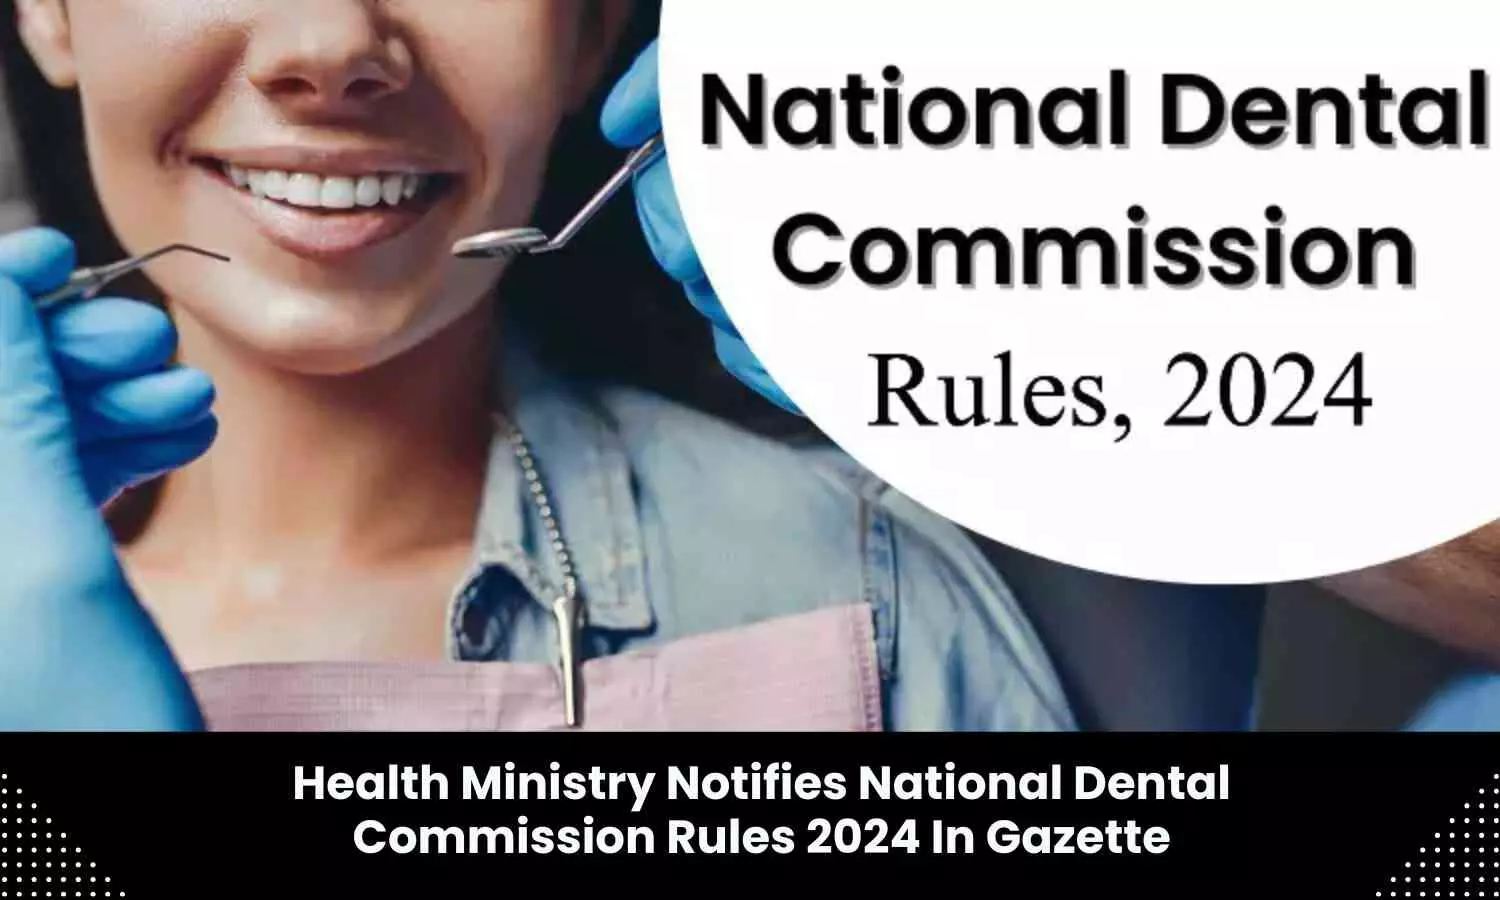 Health Ministry Publishes National Dental Commission Rules 2024, Check Out Gazette Details